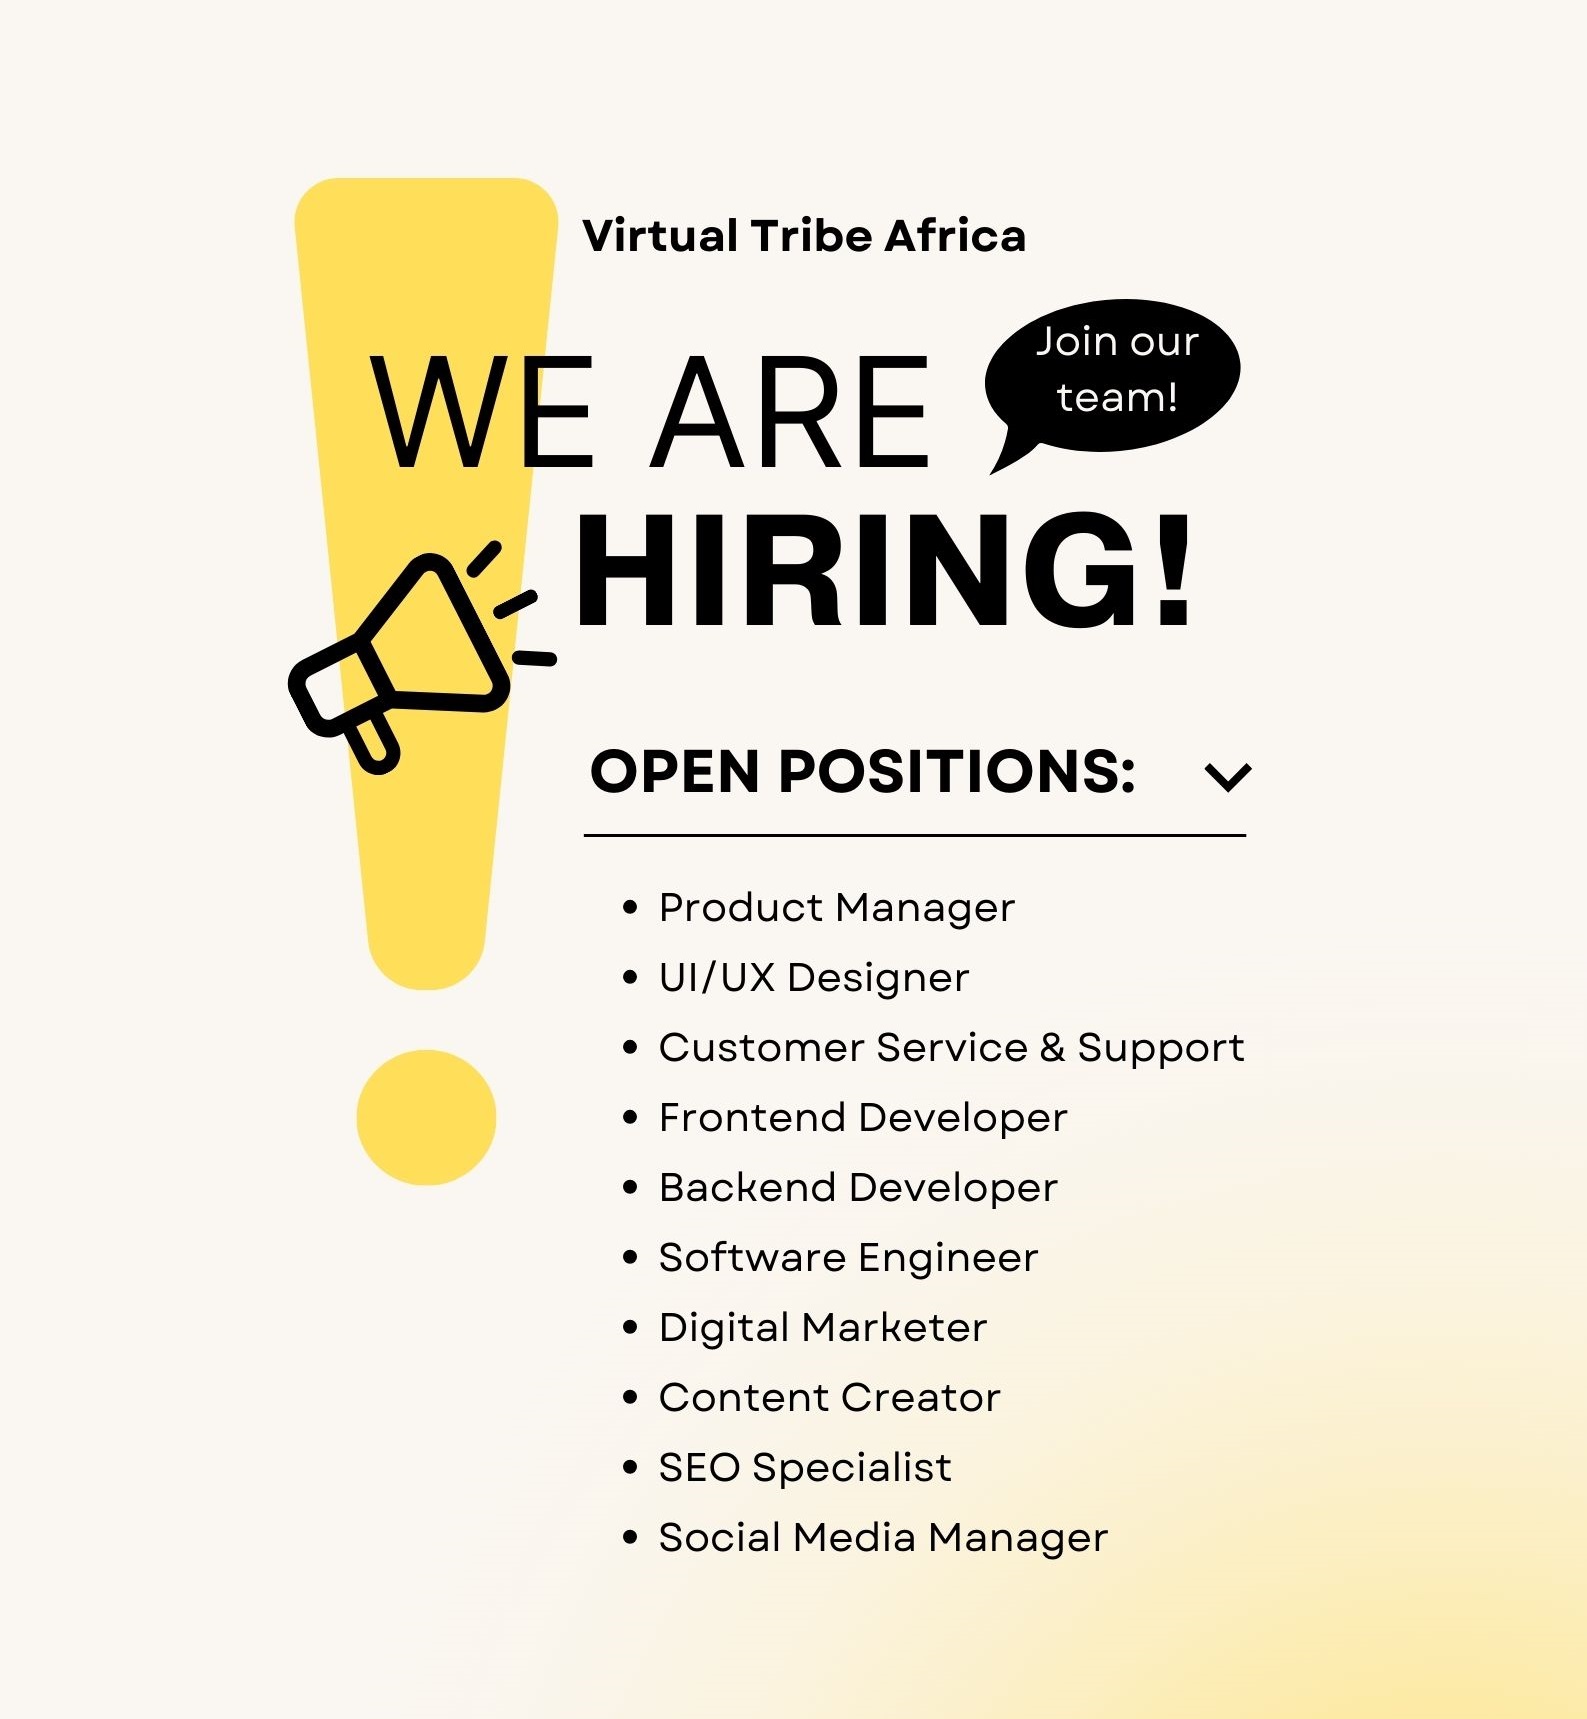 Customer Service & Support Rep Needed at Virtual Tribe Africa